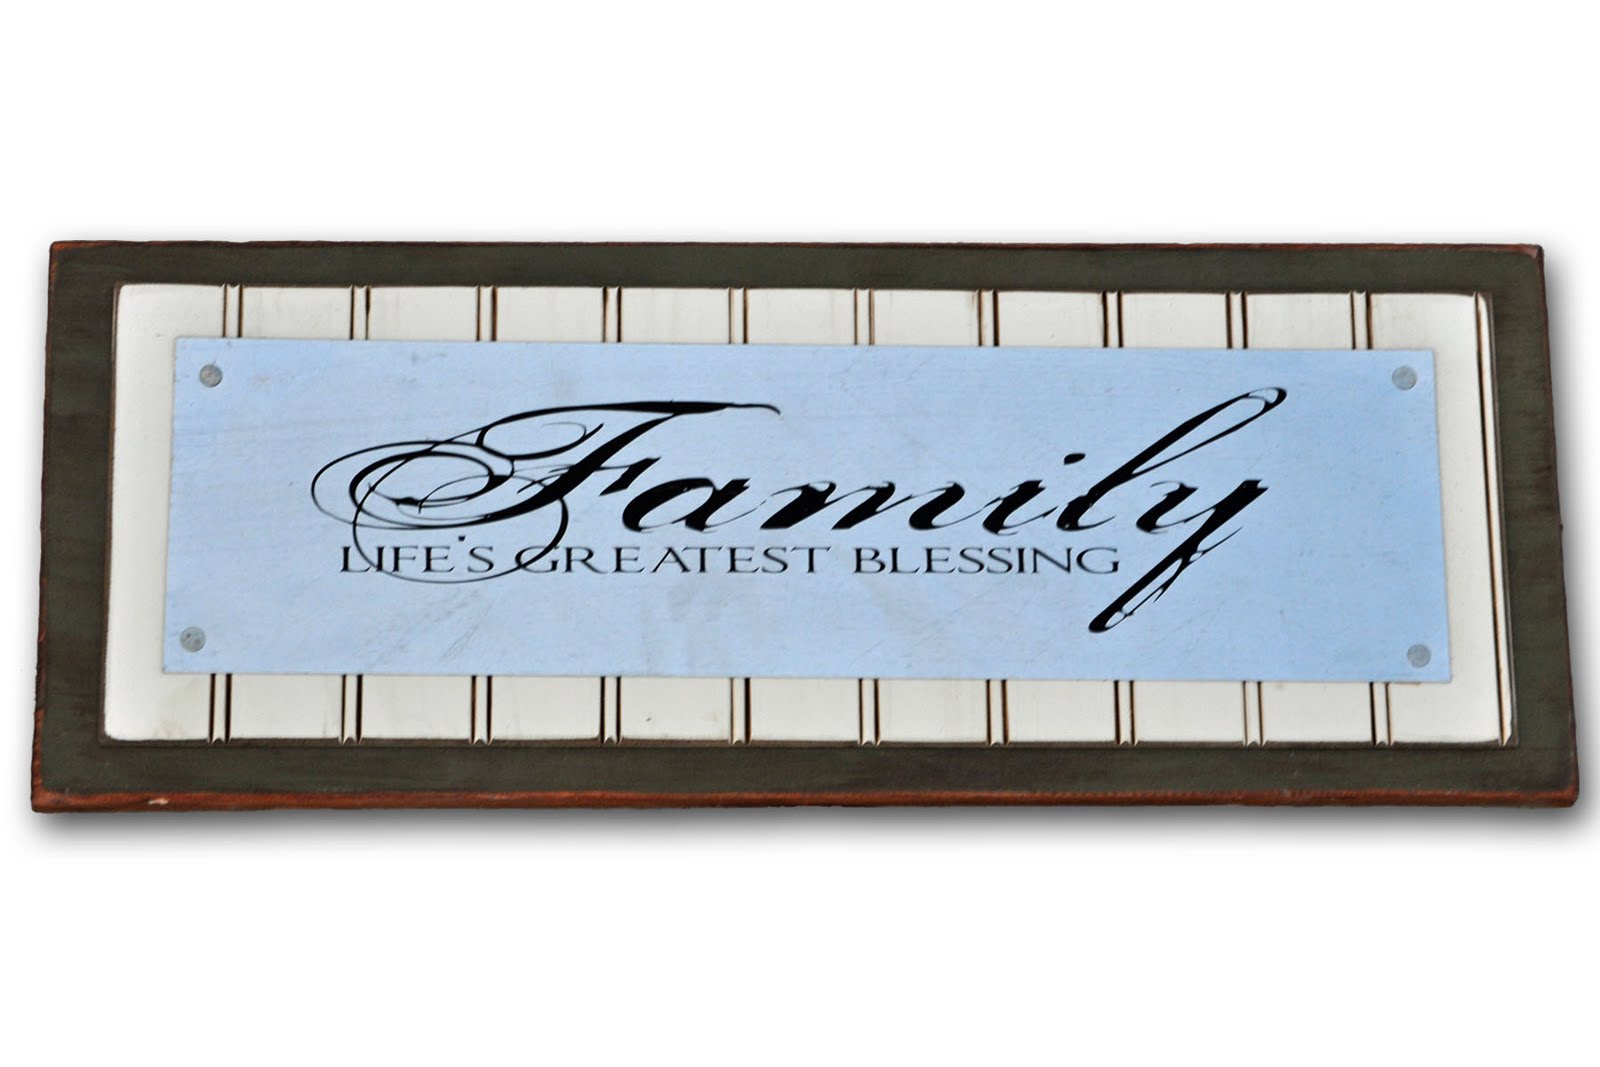 e of our most popular home decor item s is a personalized sign with the last name and established date for a lovely new or current family